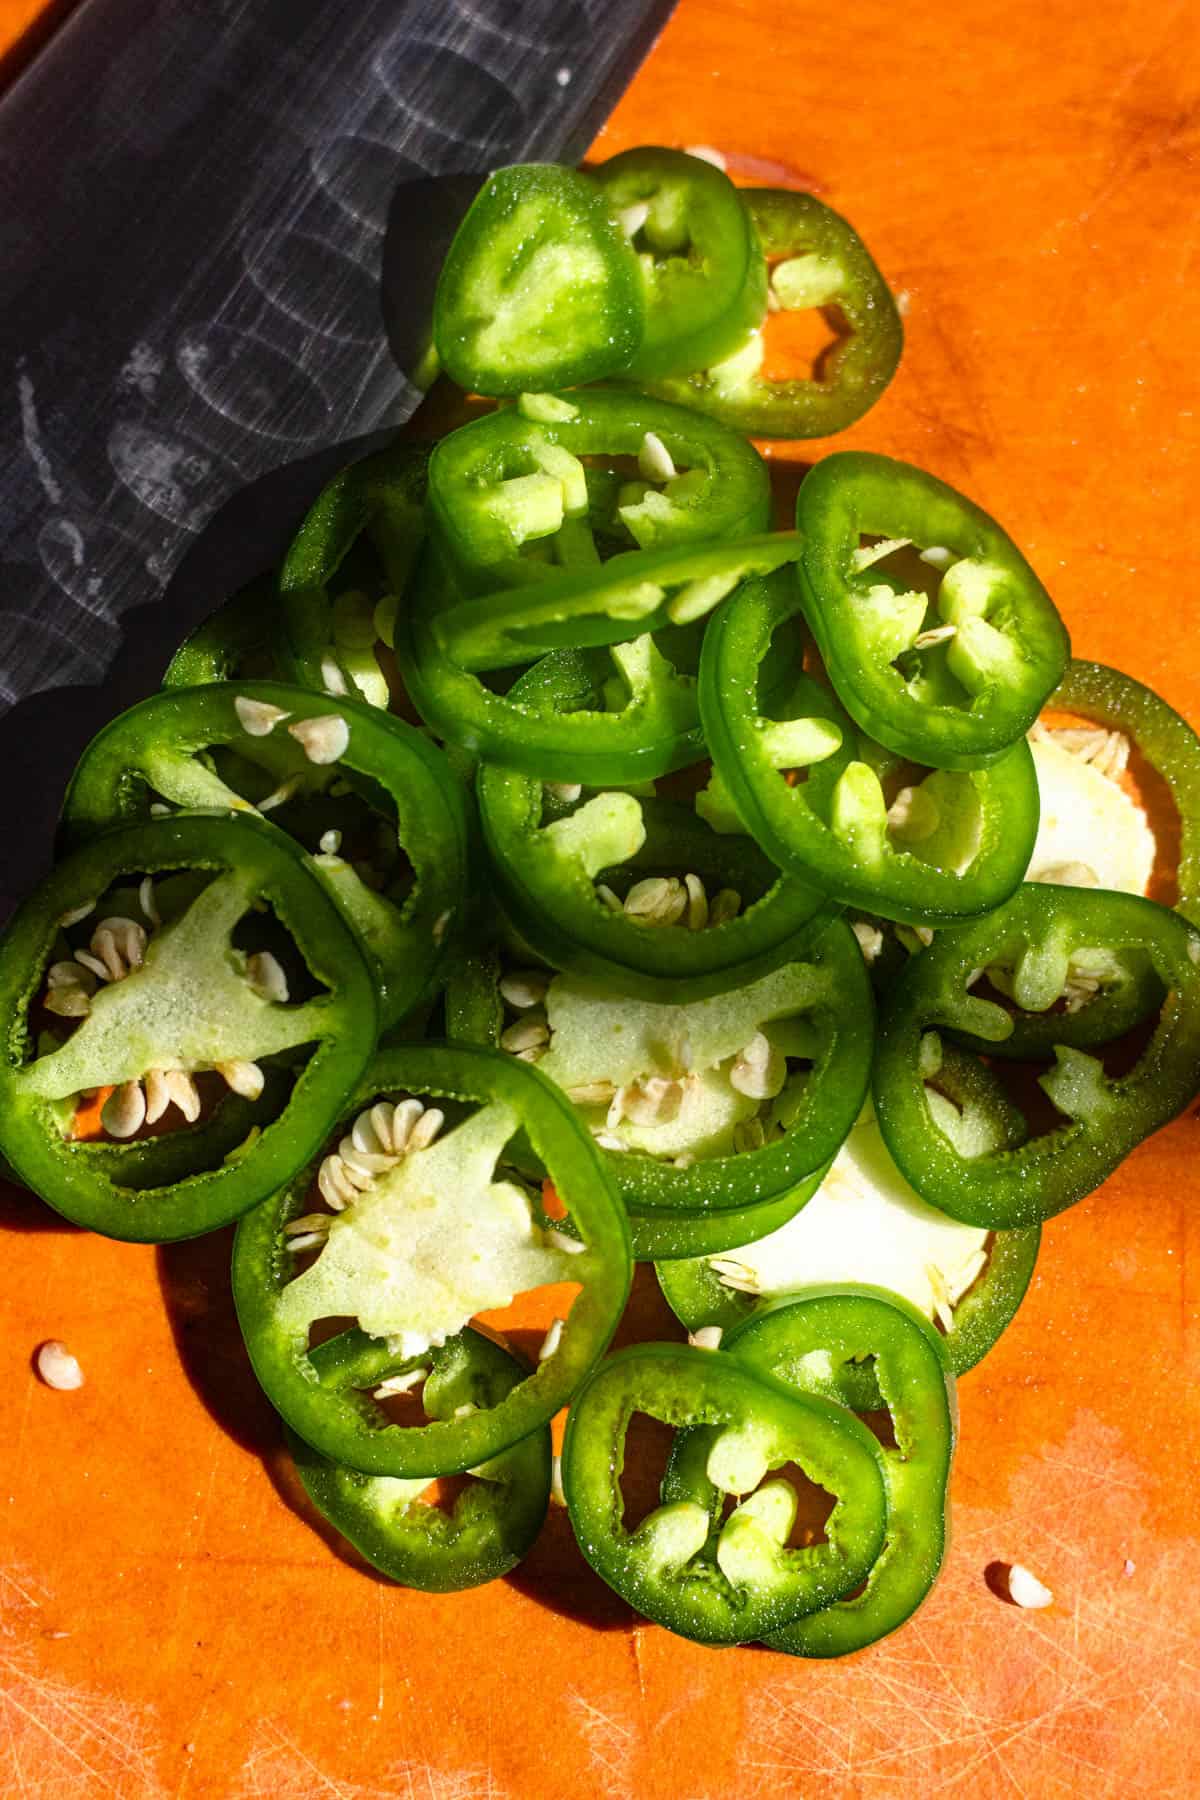 A jalapeno sliced up into round slices on a cutting board next to a chef's knife to add to curtido.